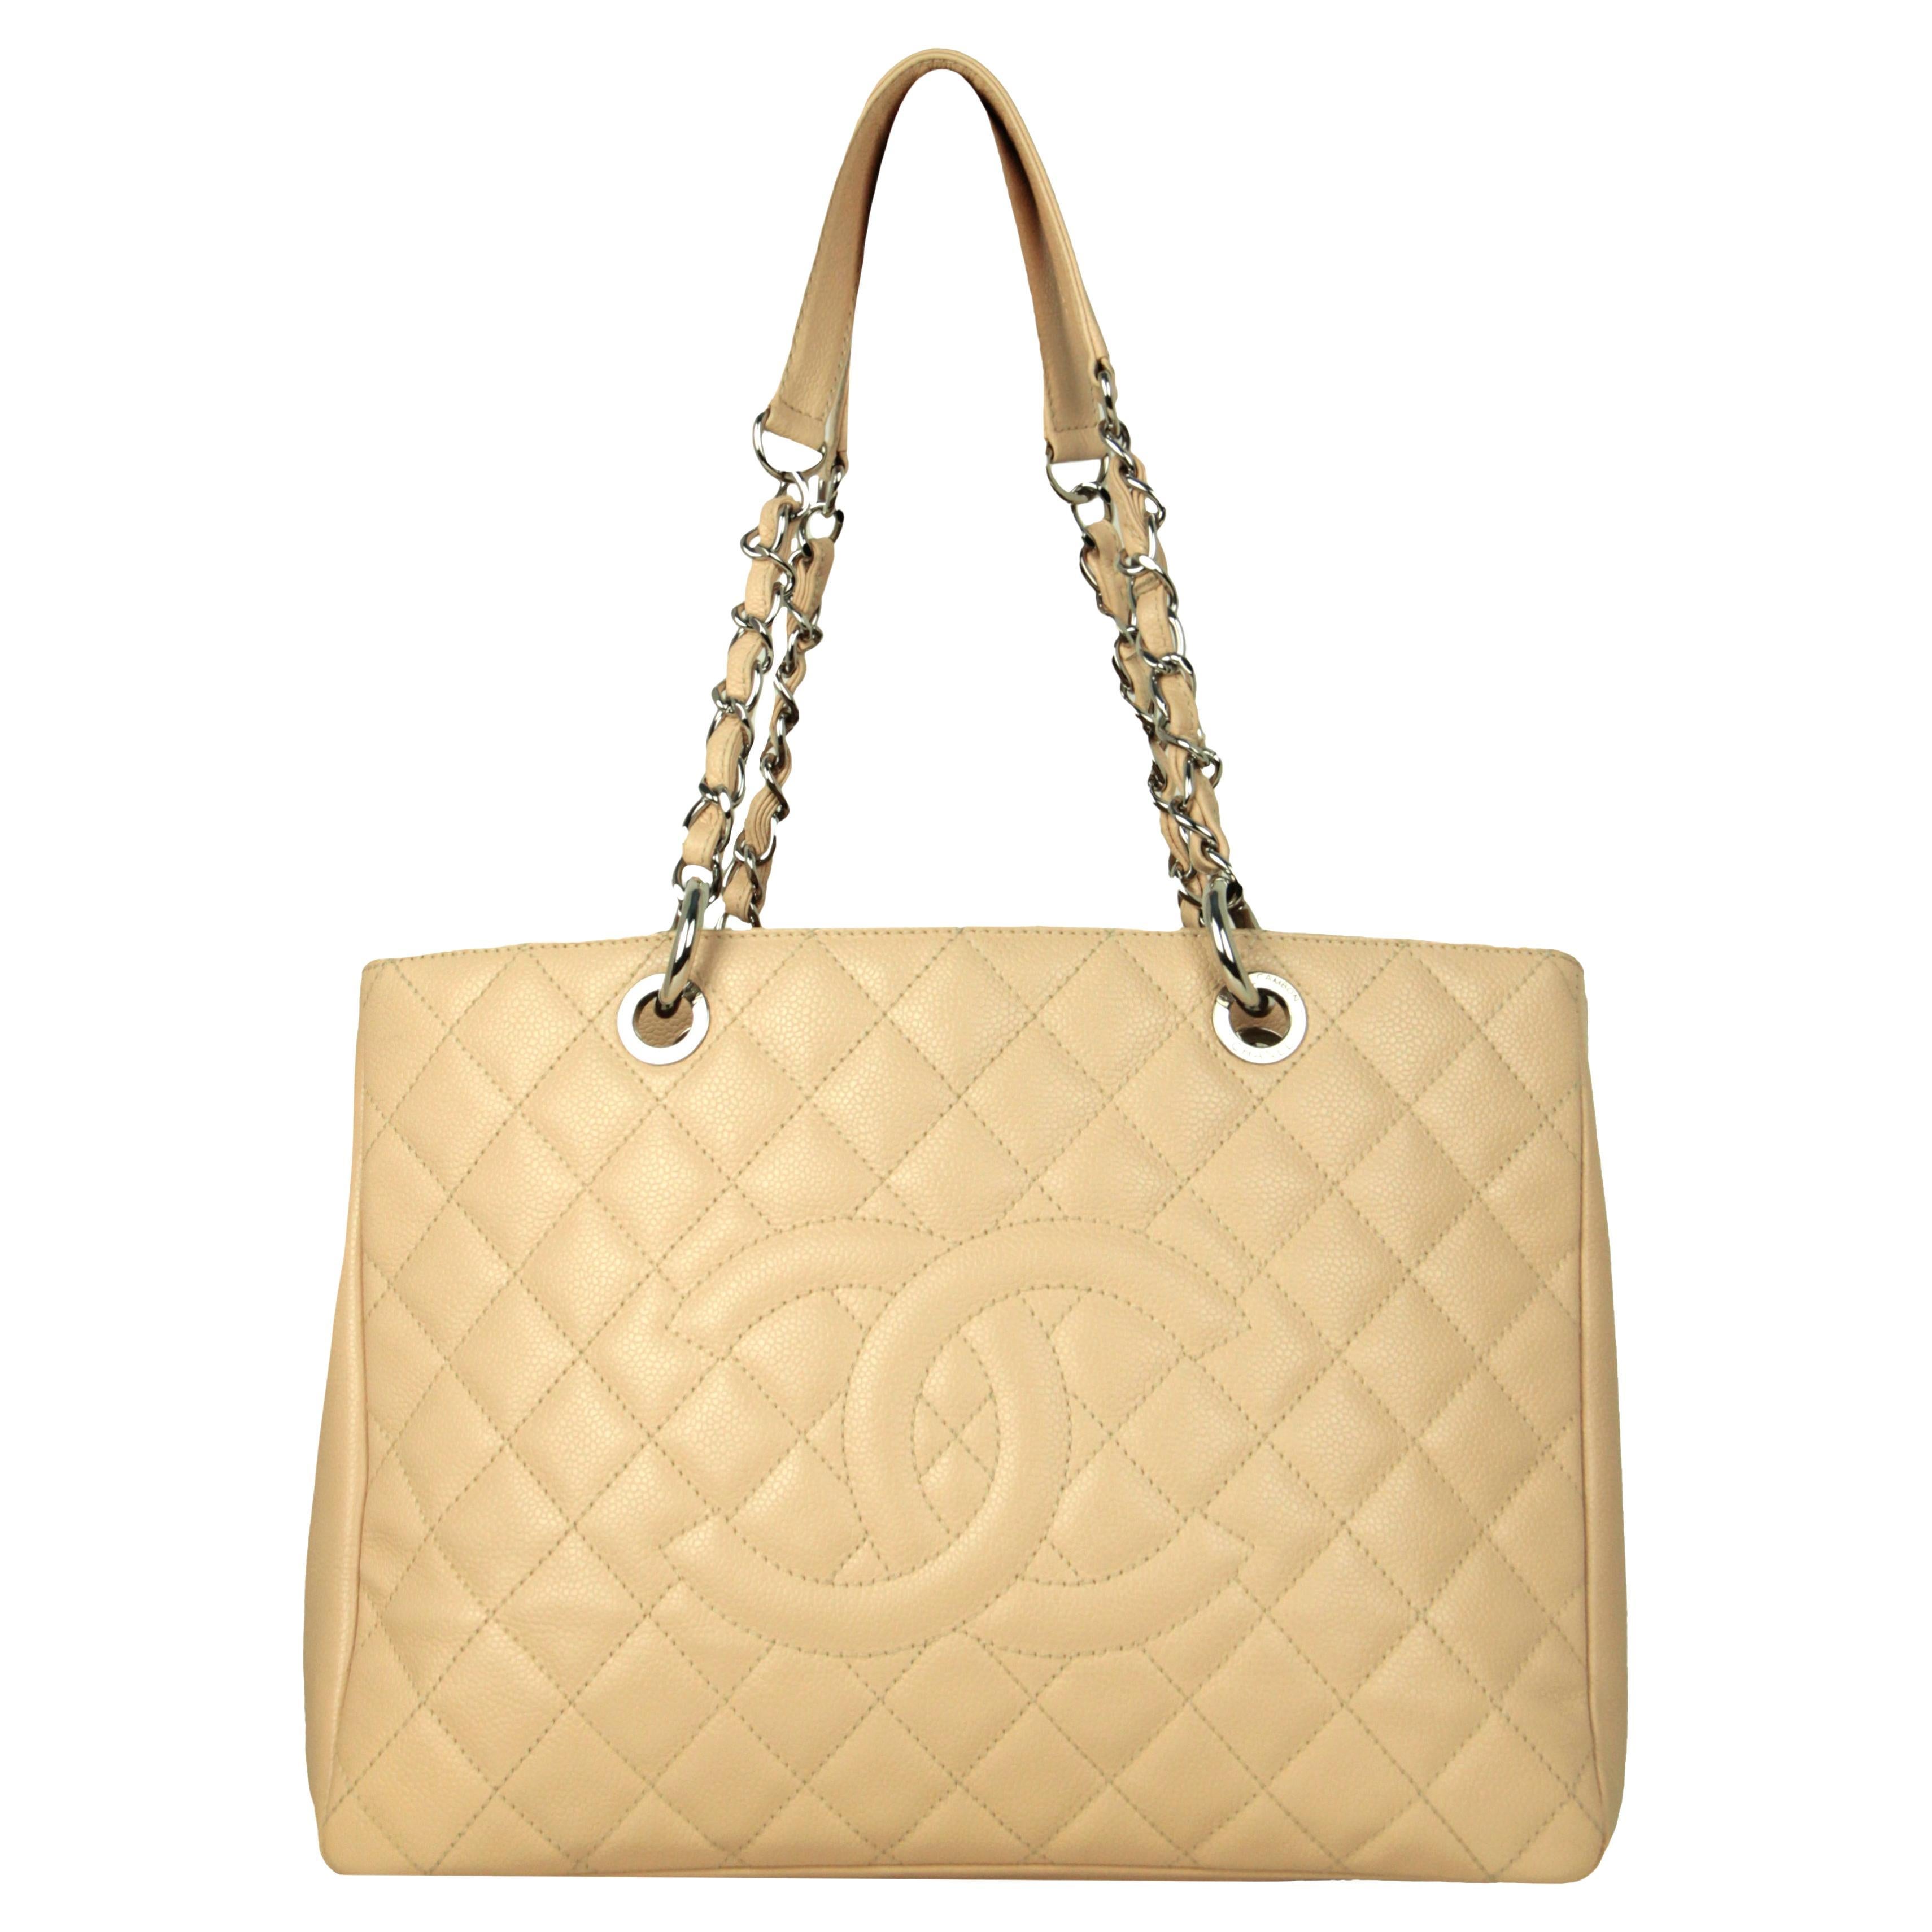 Chanel Beige Caviar Leather Quilted Grand Shopper Tote GST Bag